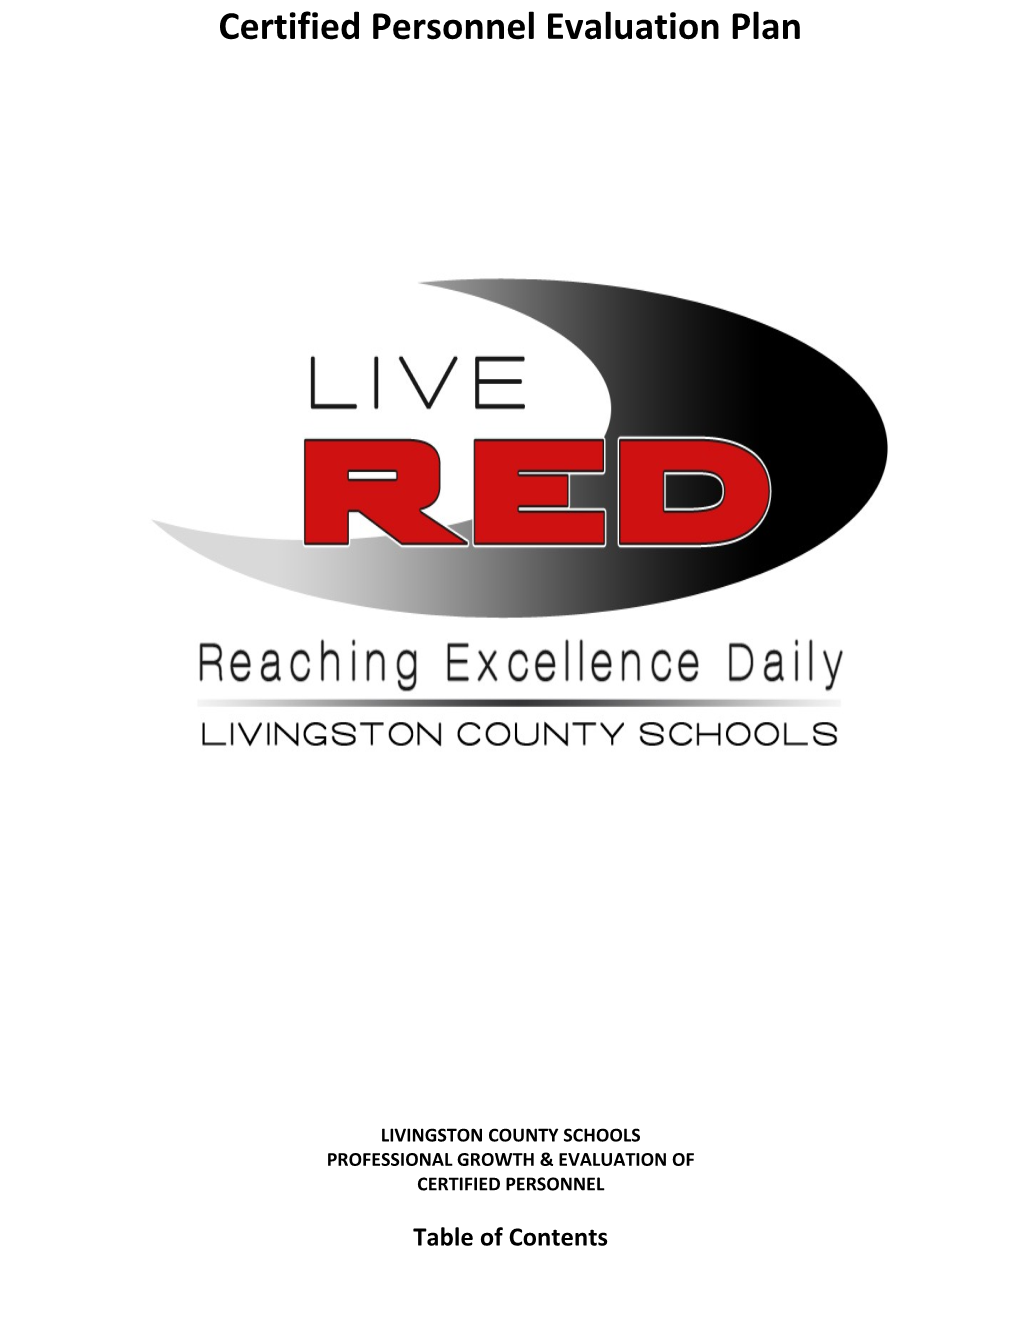 Livingston County Schools Certified Personnel Evaluation